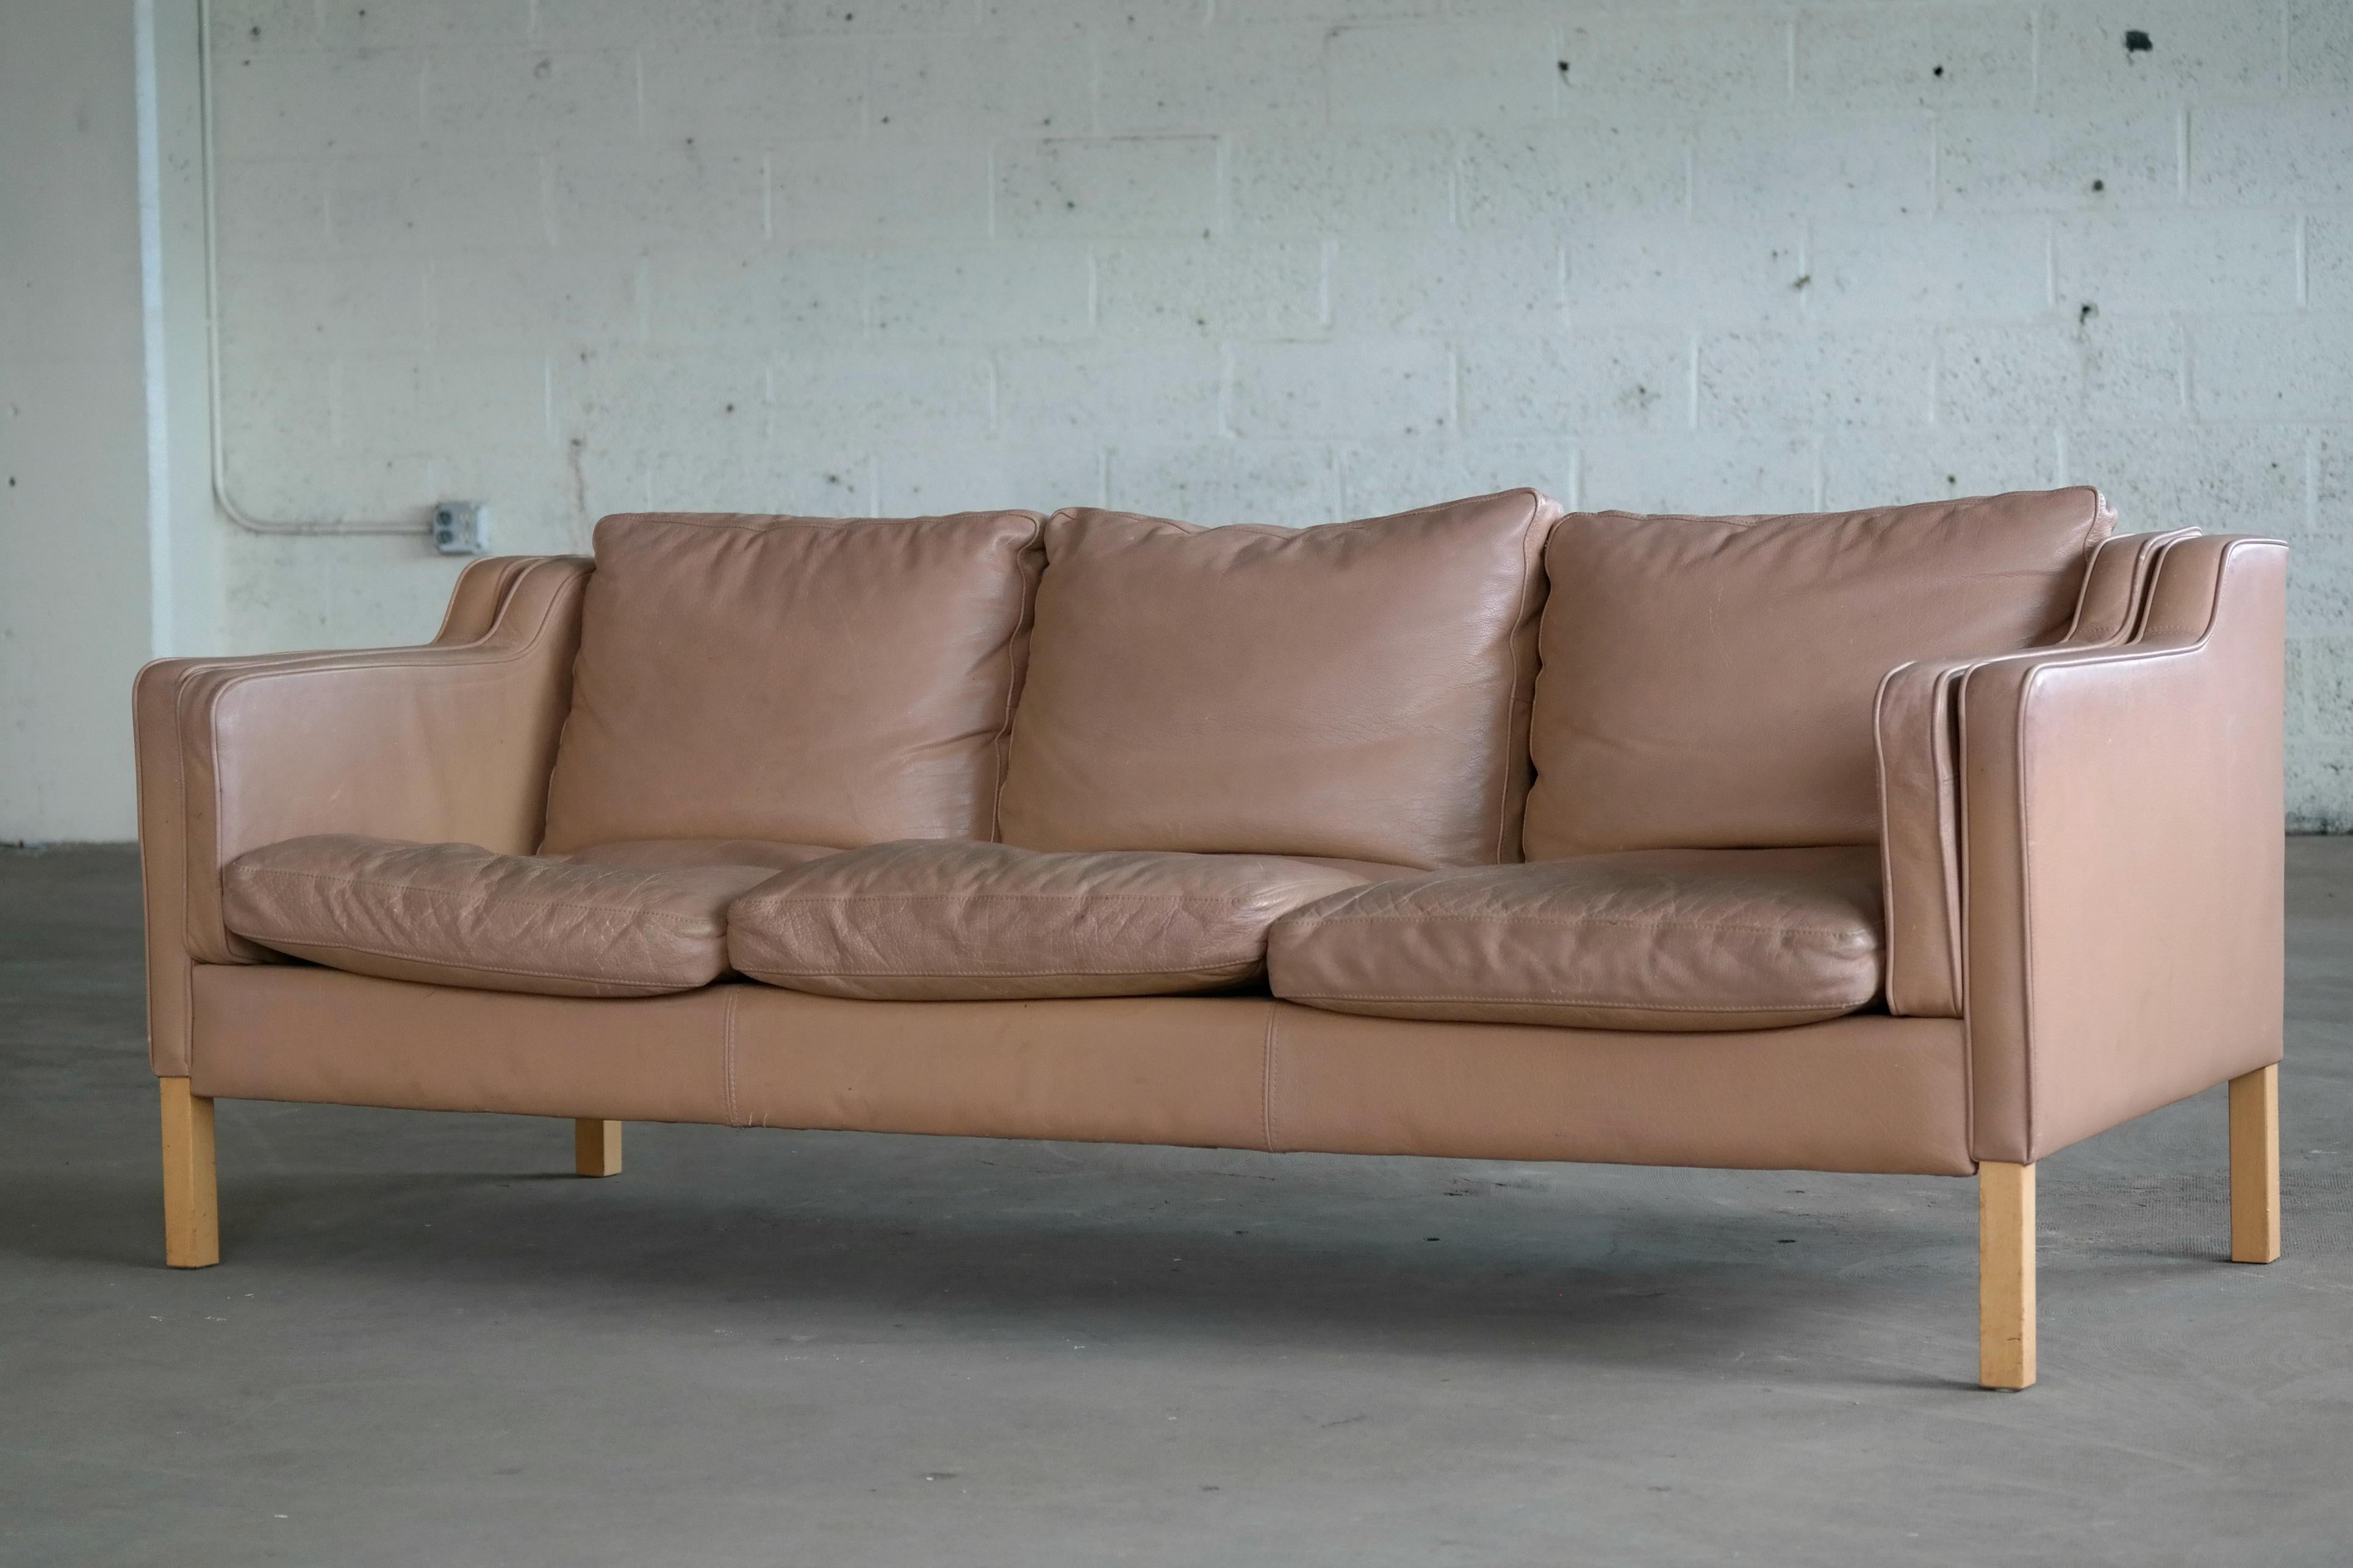 Classic Danish Midcentury Sofa in Tan Leather in the Style of Børge Mogensen 1